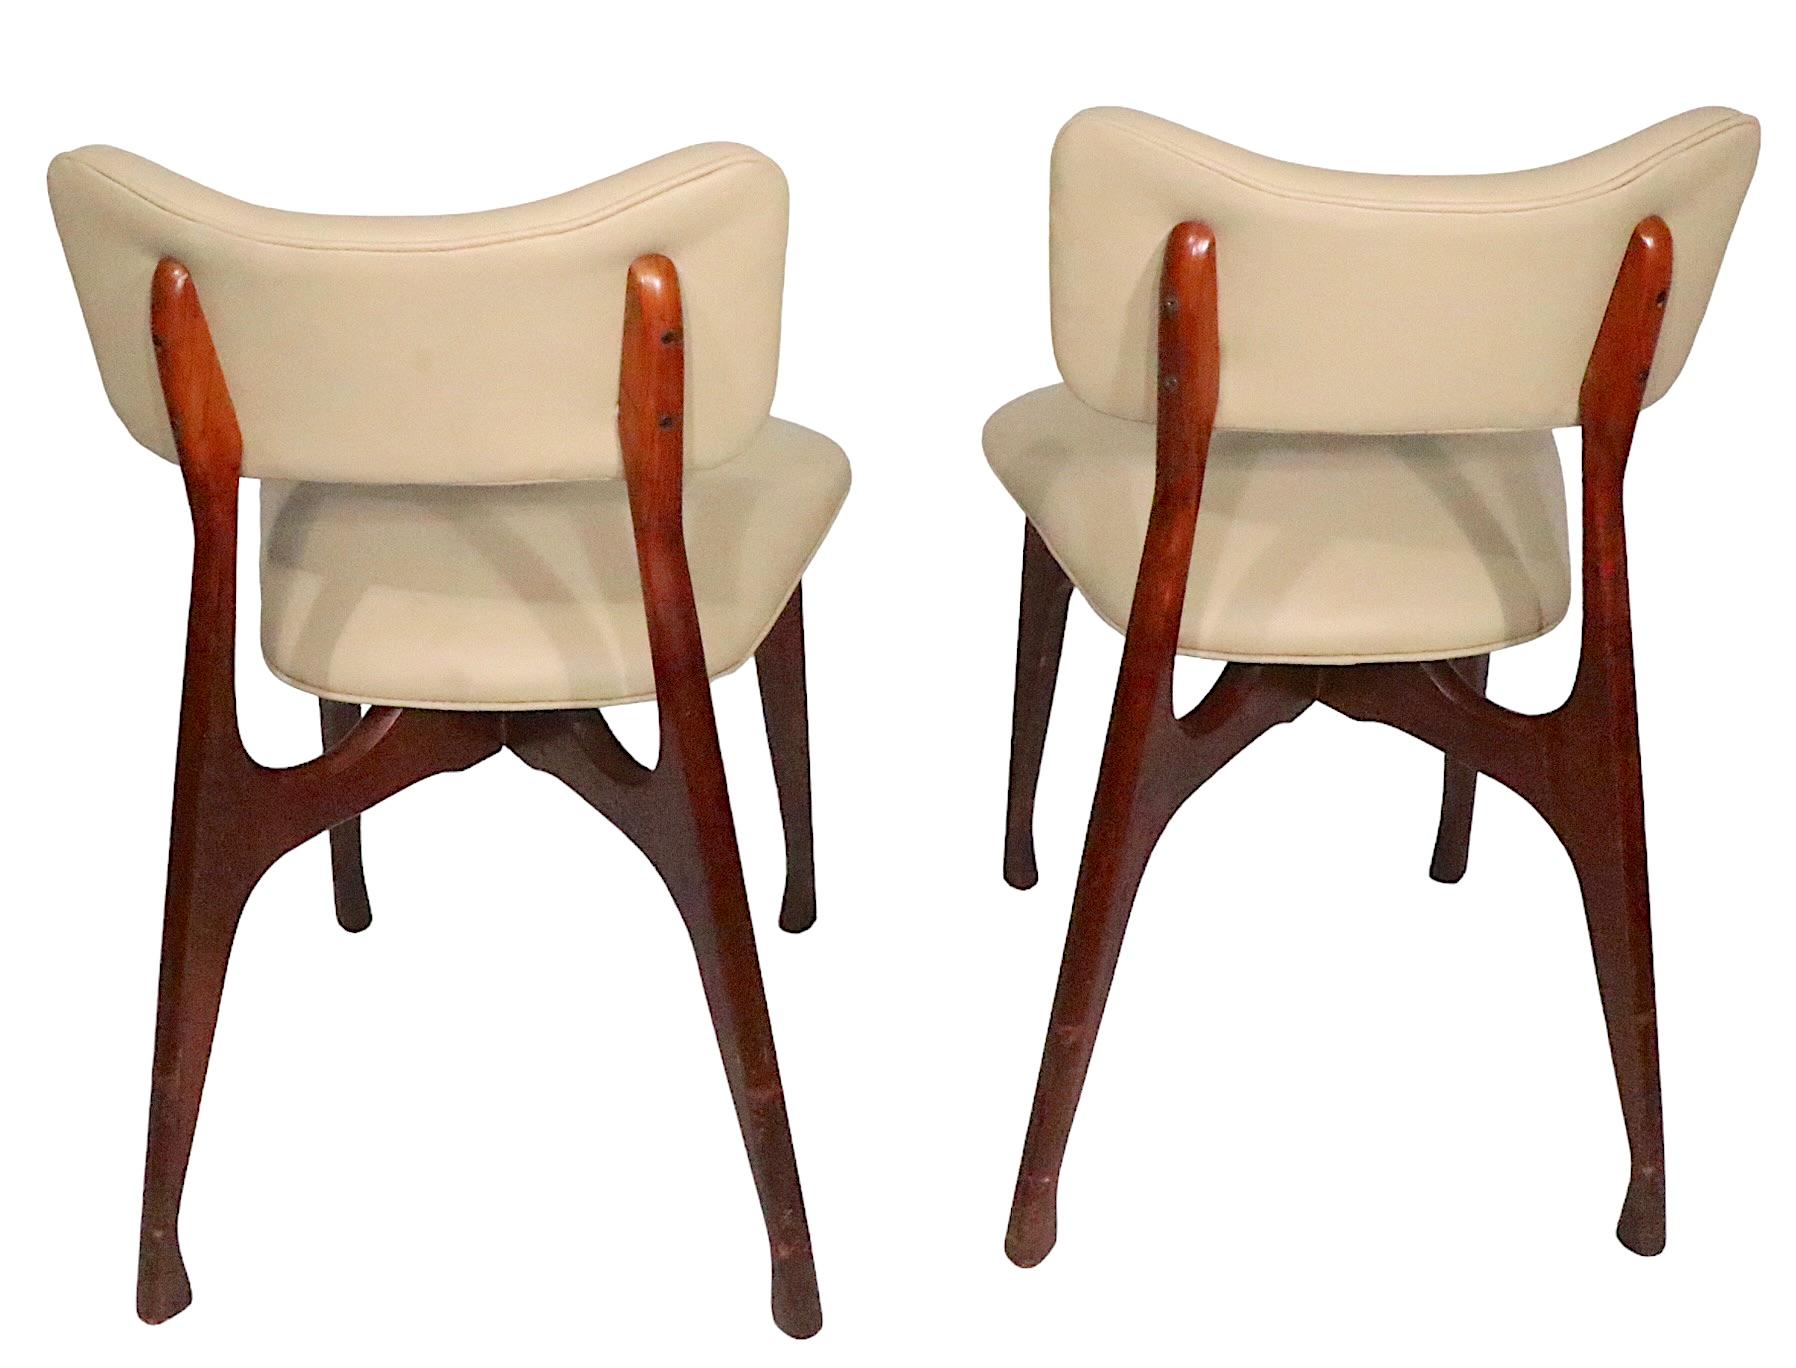 Pr. Midcentury Dining Side Chairs Att. to Ico Parisi, circa 1950s For Sale 8